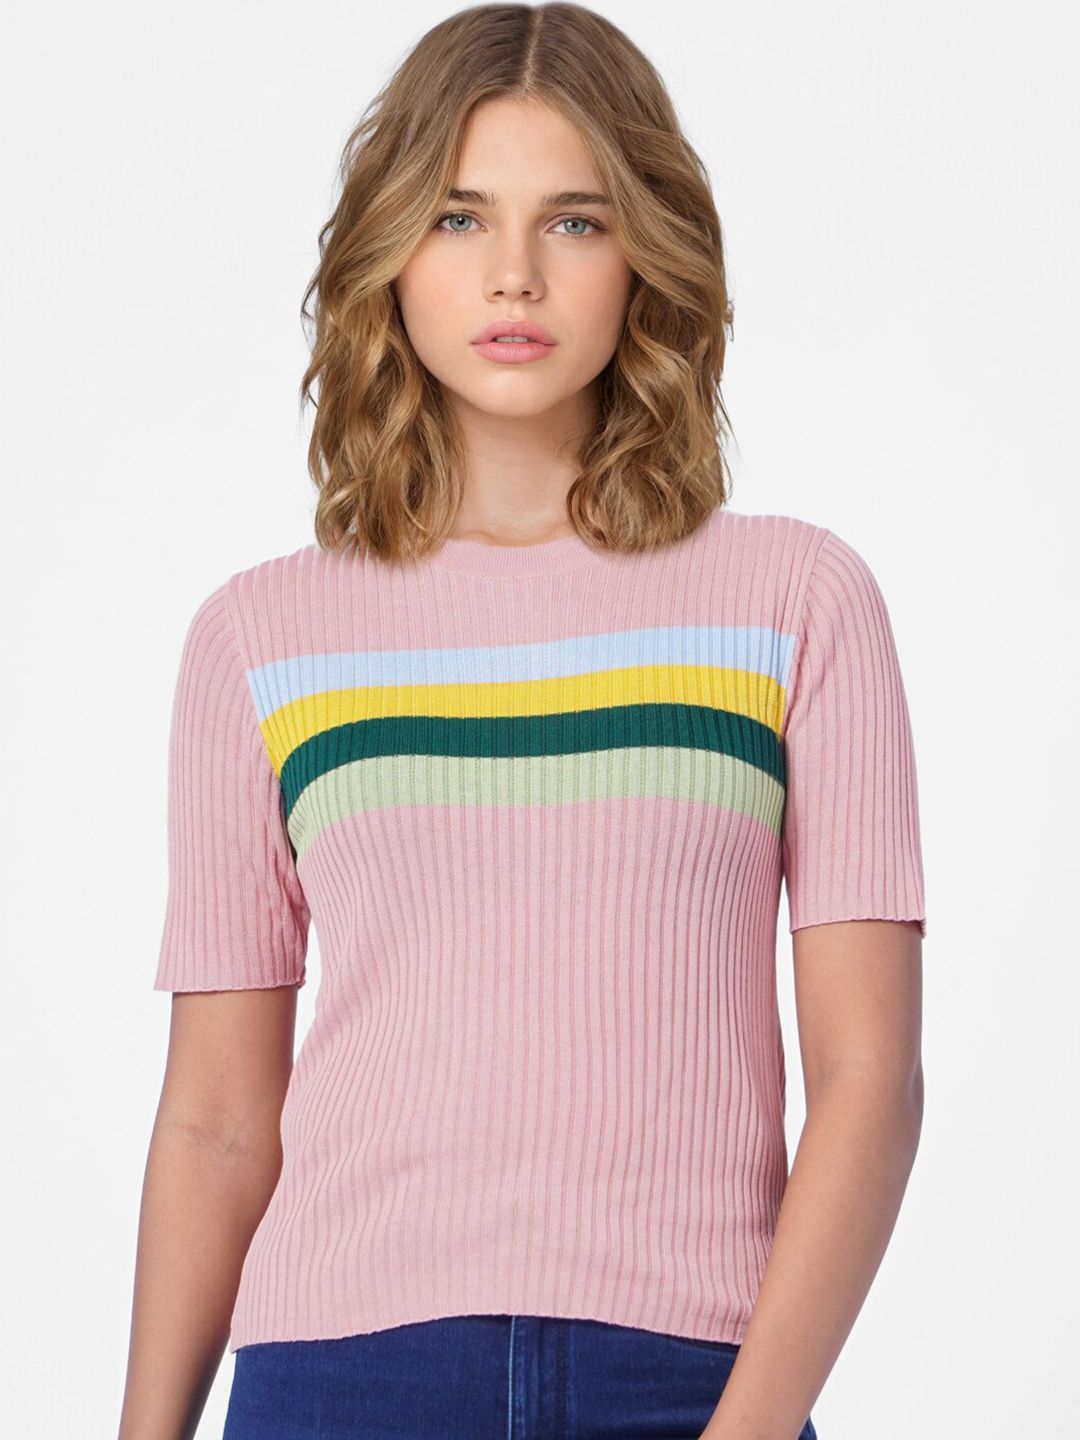 ONLY Pink Striped Top Price in India